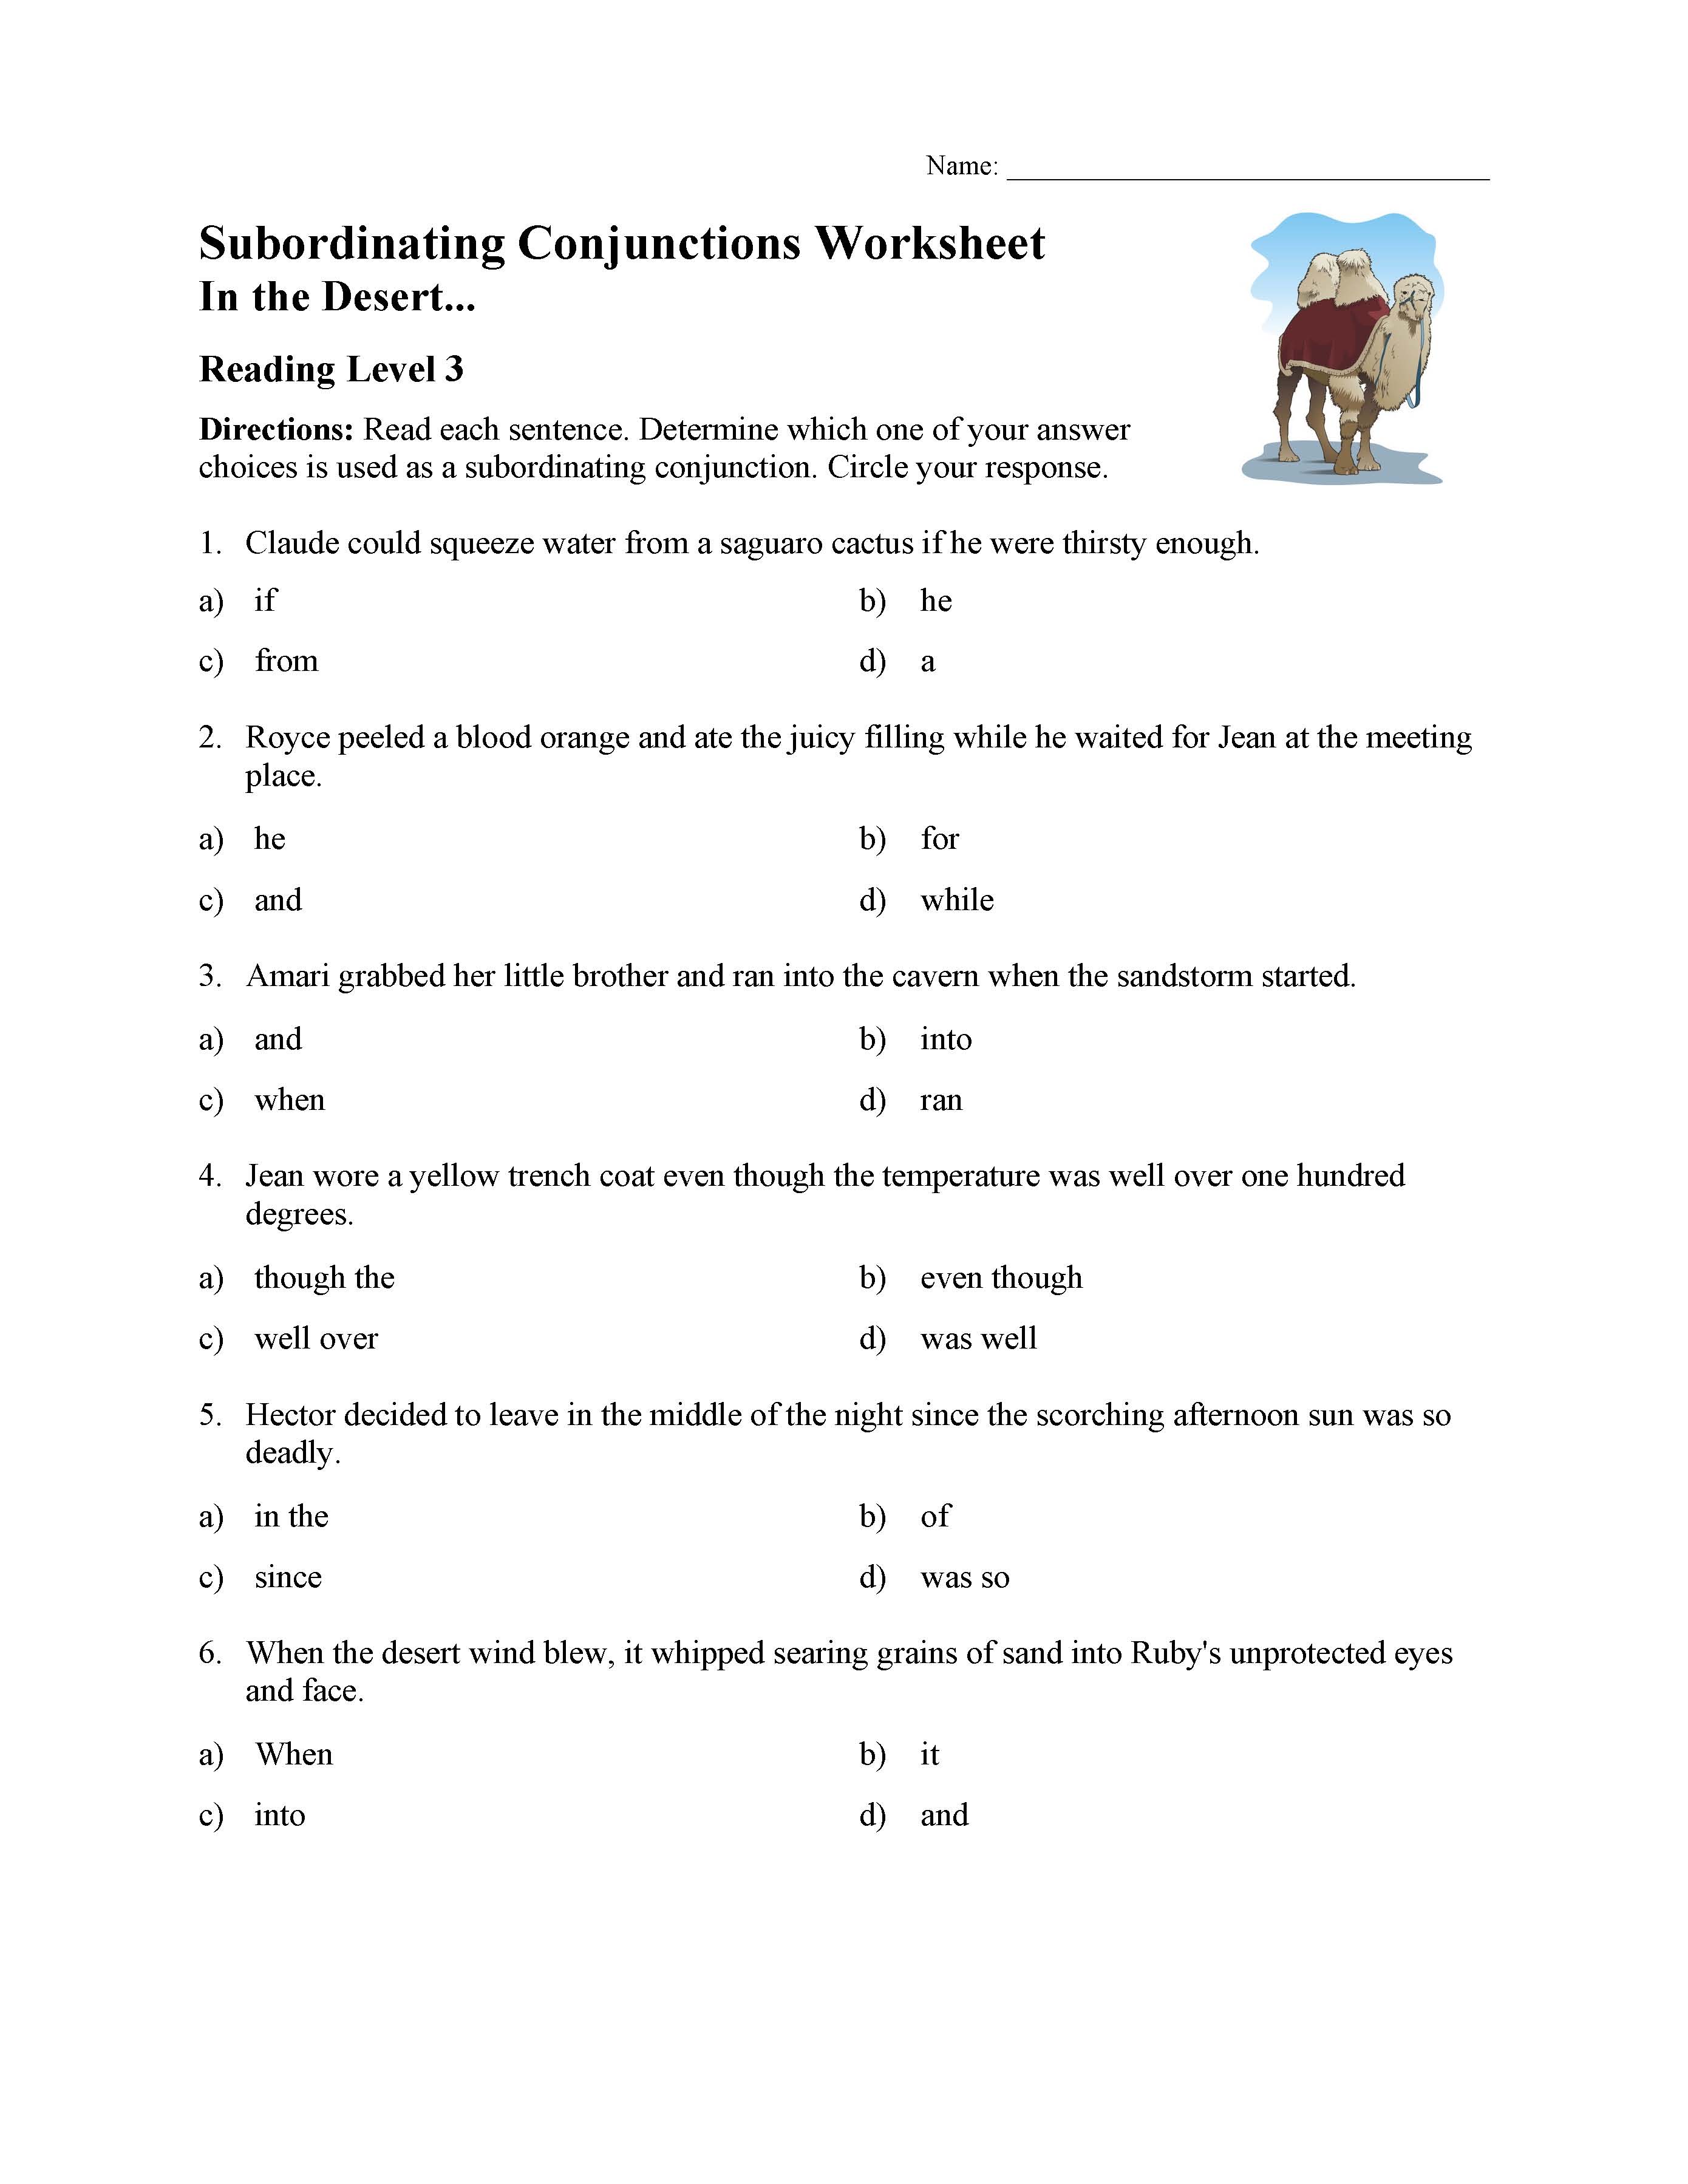 This is a preview image of the Subordinating Conjunctions Worksheet - Reading Level 3.